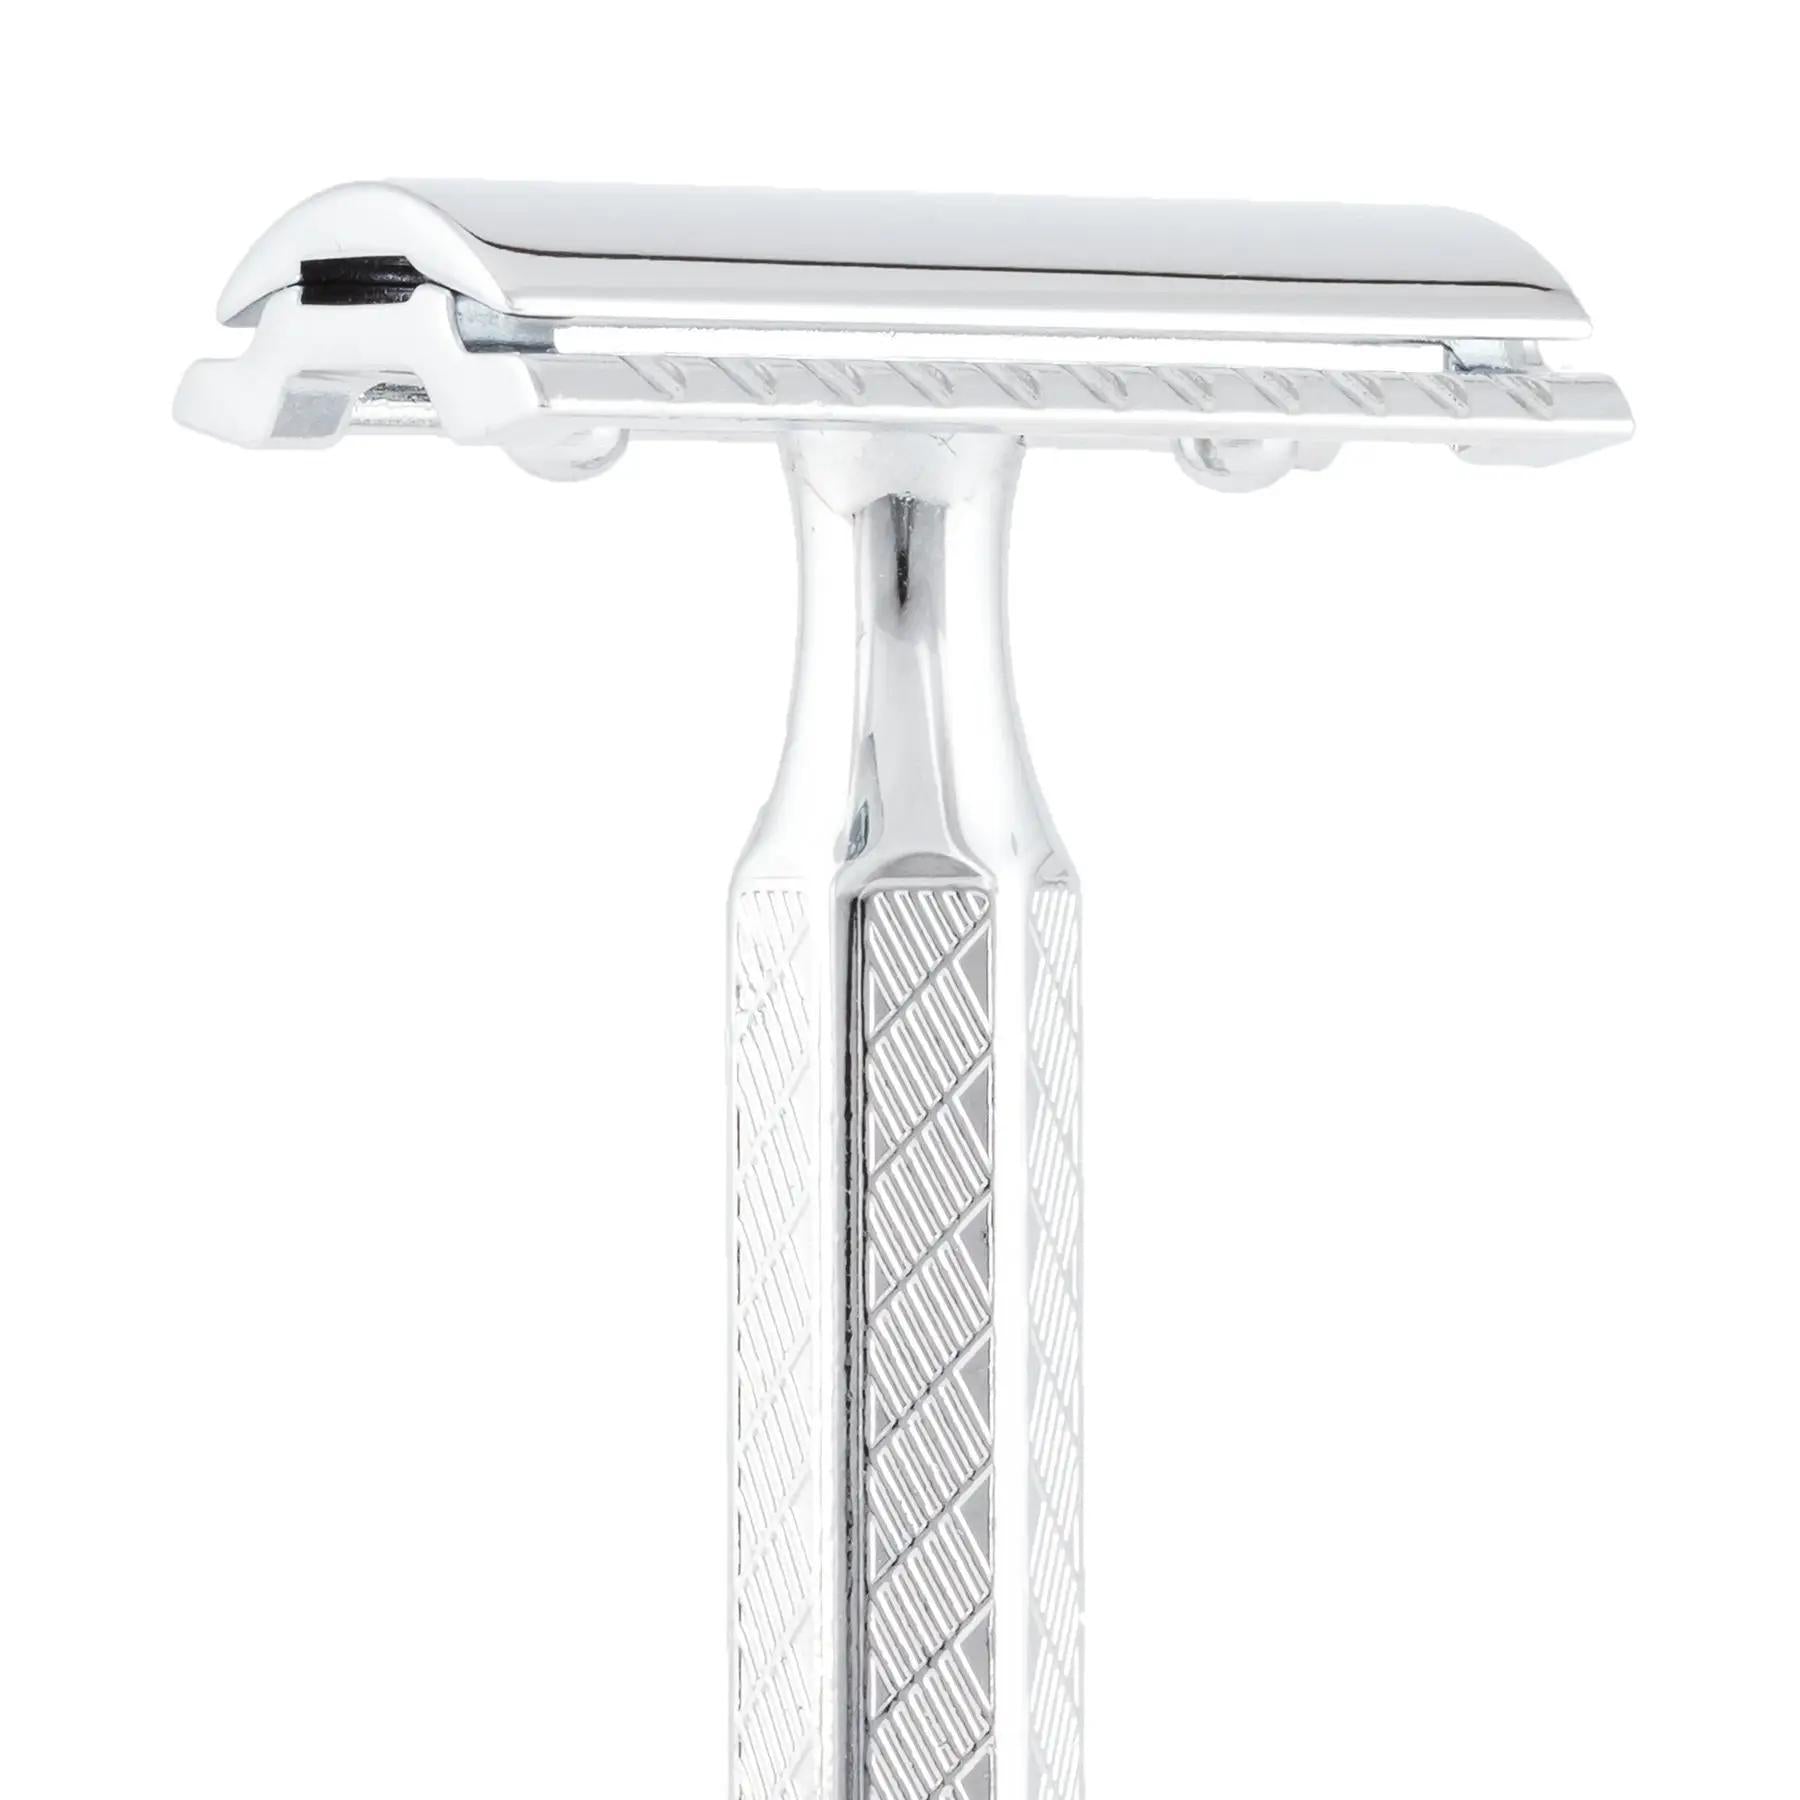 Merkur Double Edge Safety Razor | Straight Cut, Chrome-Plated, Etched Handle 42C